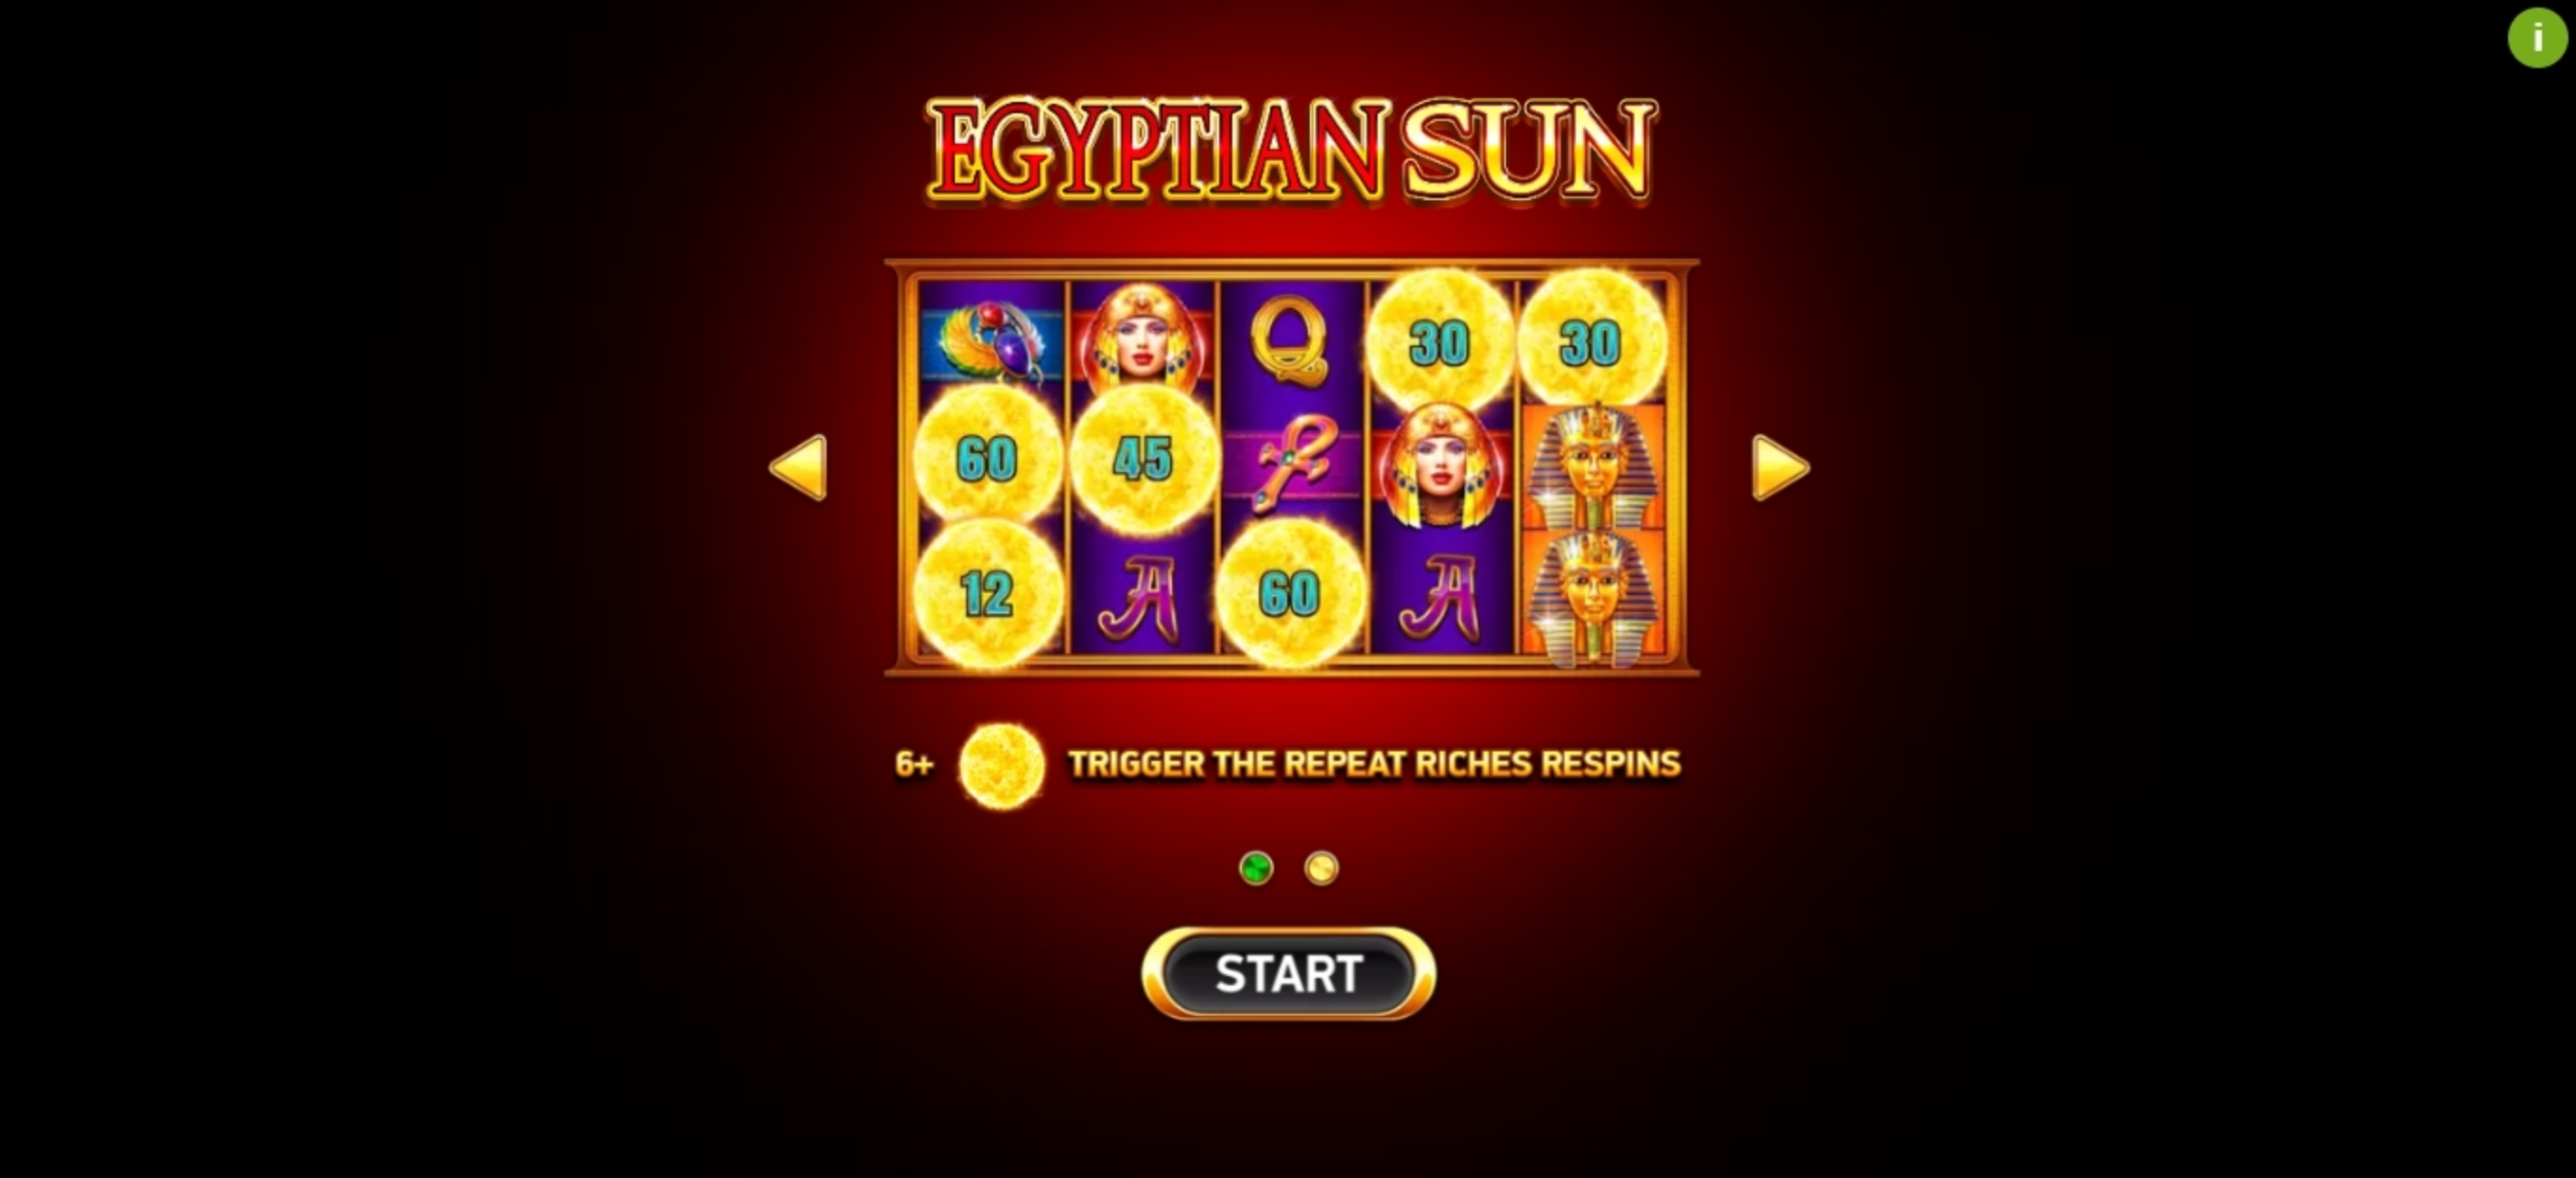 Play Egyptian Sun Free Casino Slot Game by Ruby Play